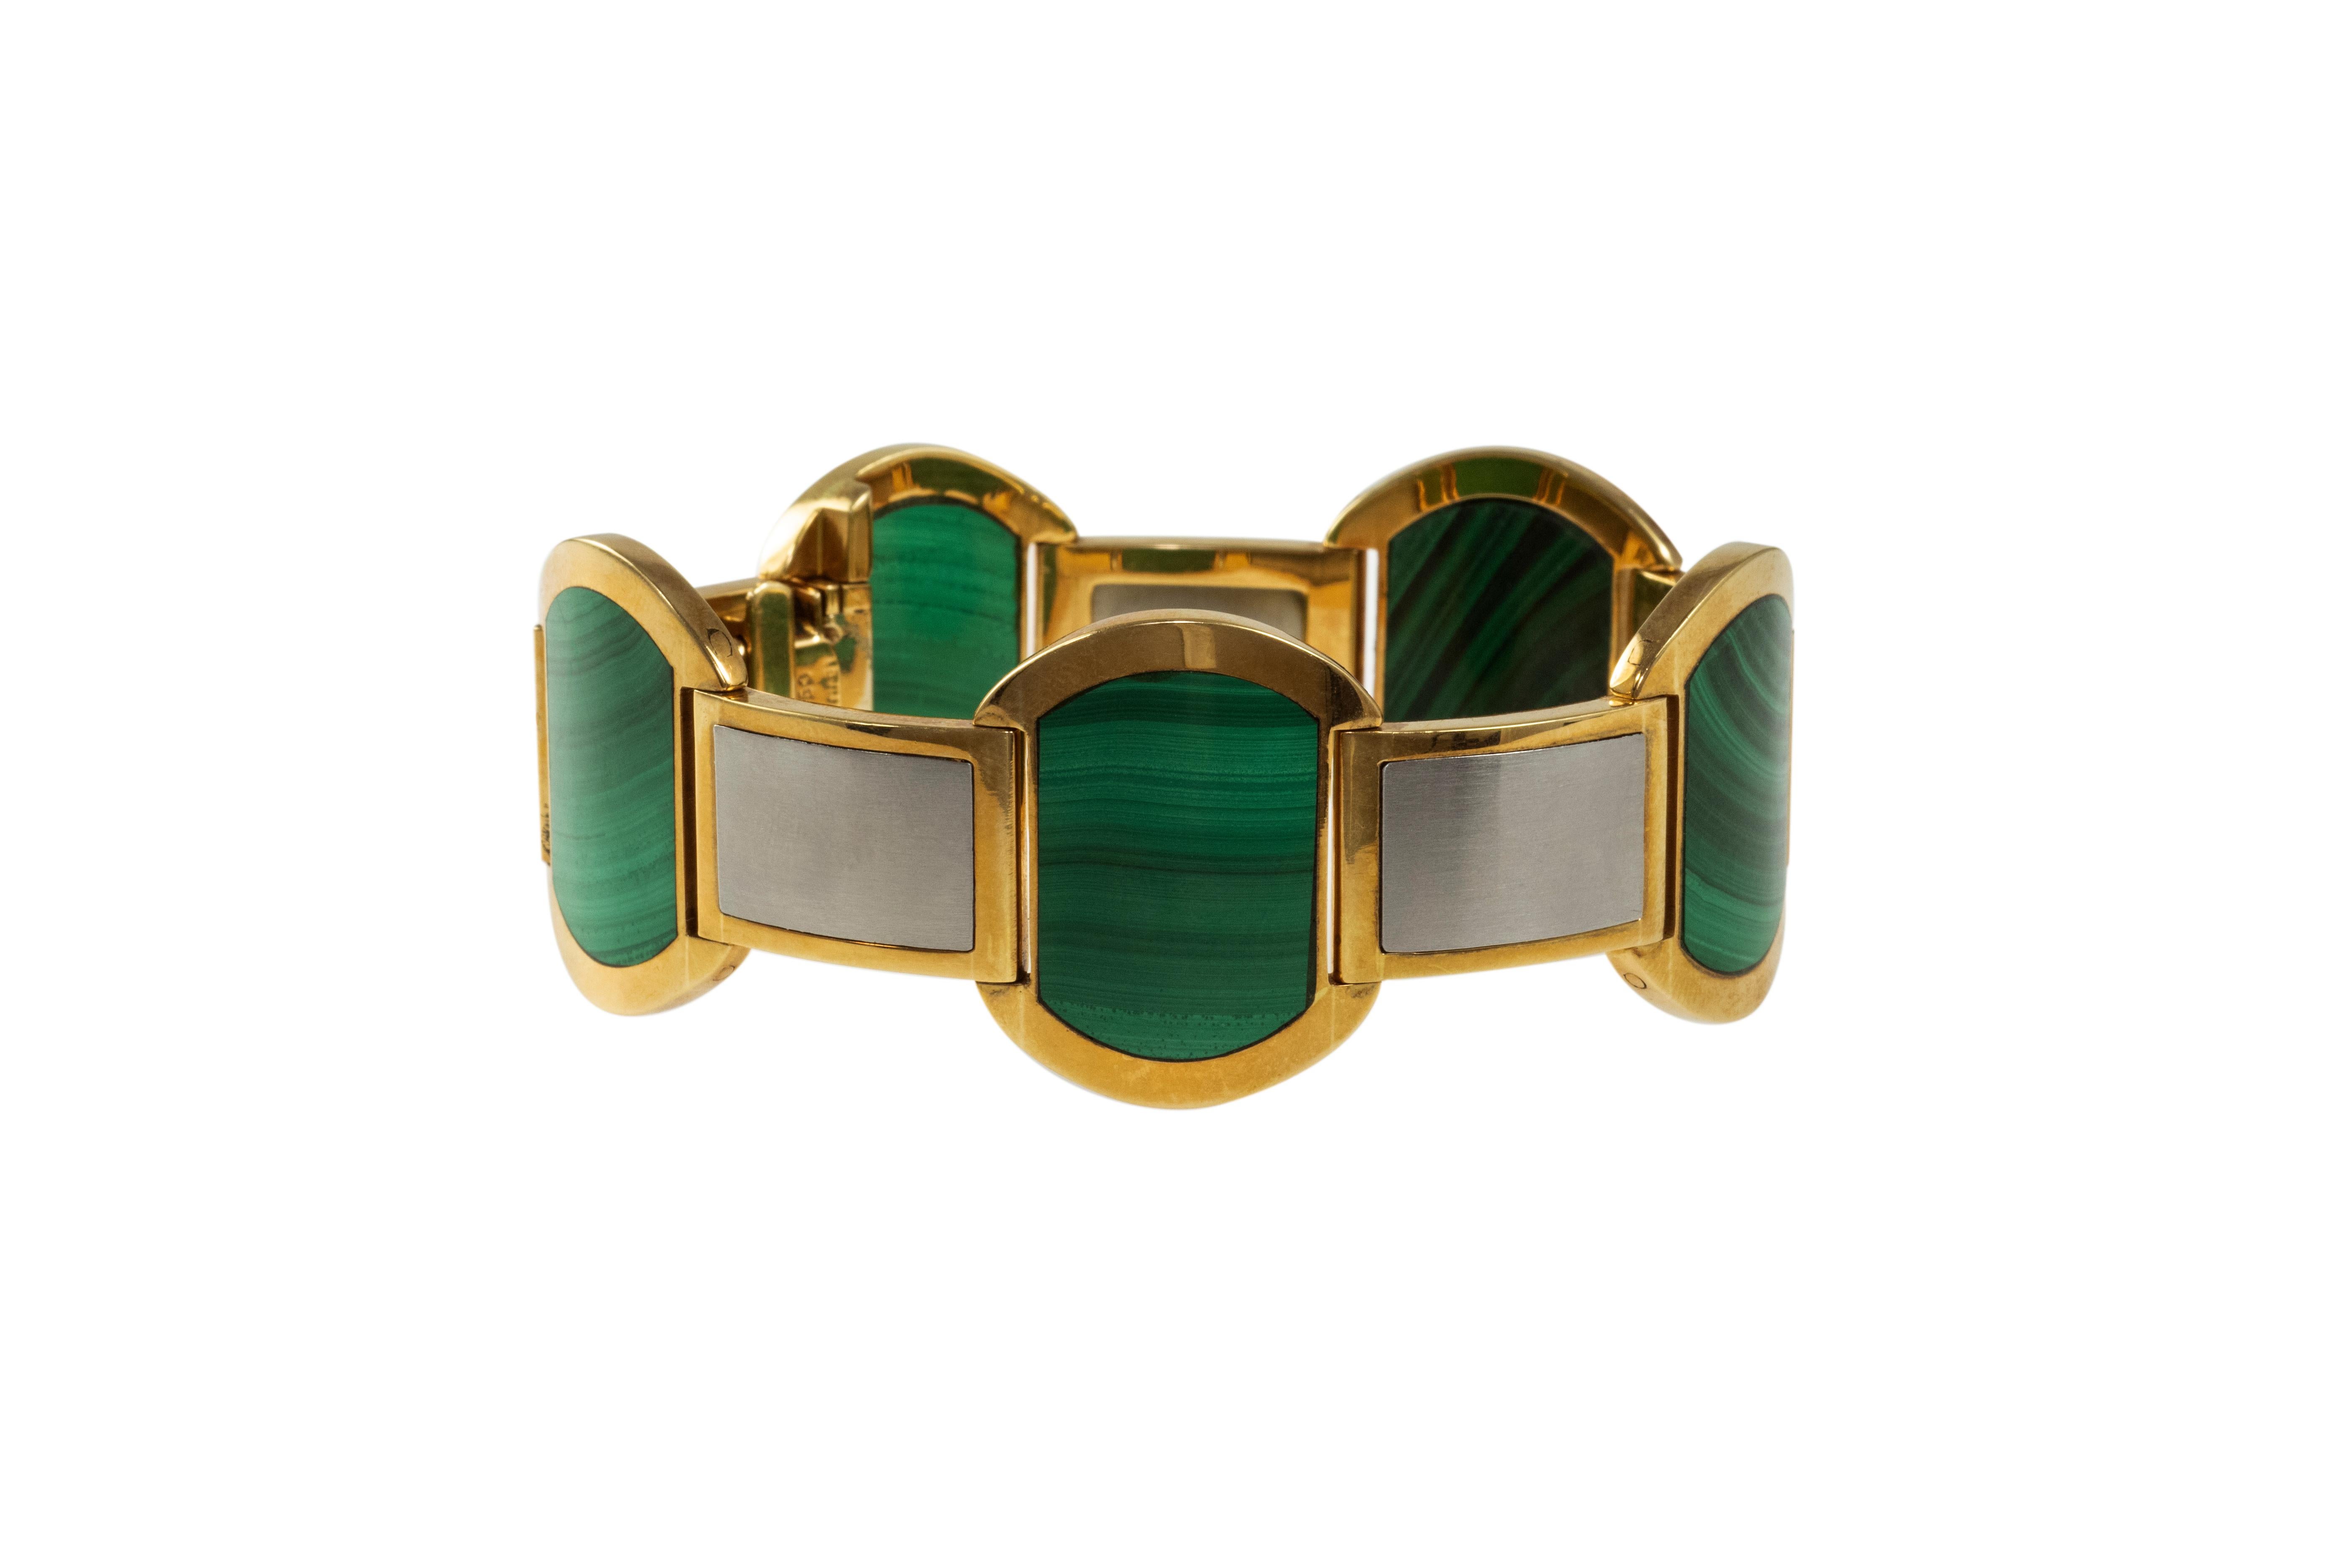 A rarely available malachite and 18 karat yellow gold and white gold bracelet, by Bulgari  c. 1970. 
The bracelet is stamped 750 and weighs 101.61 grams. It measures 7